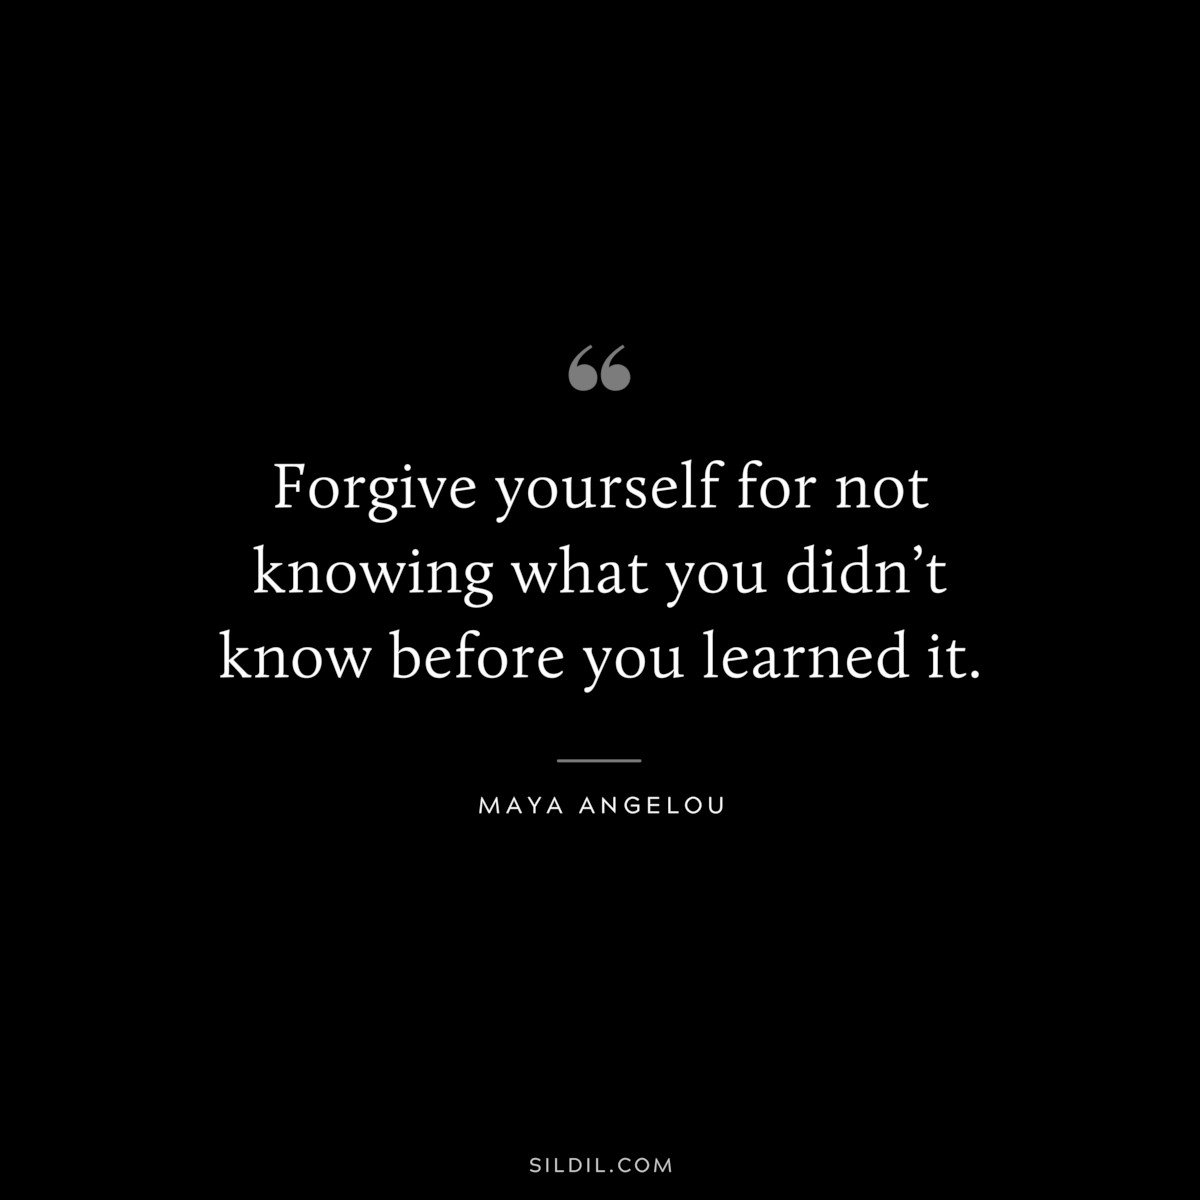 Forgive yourself for not knowing what you didn’t know before you learned it. ― Maya Angelou